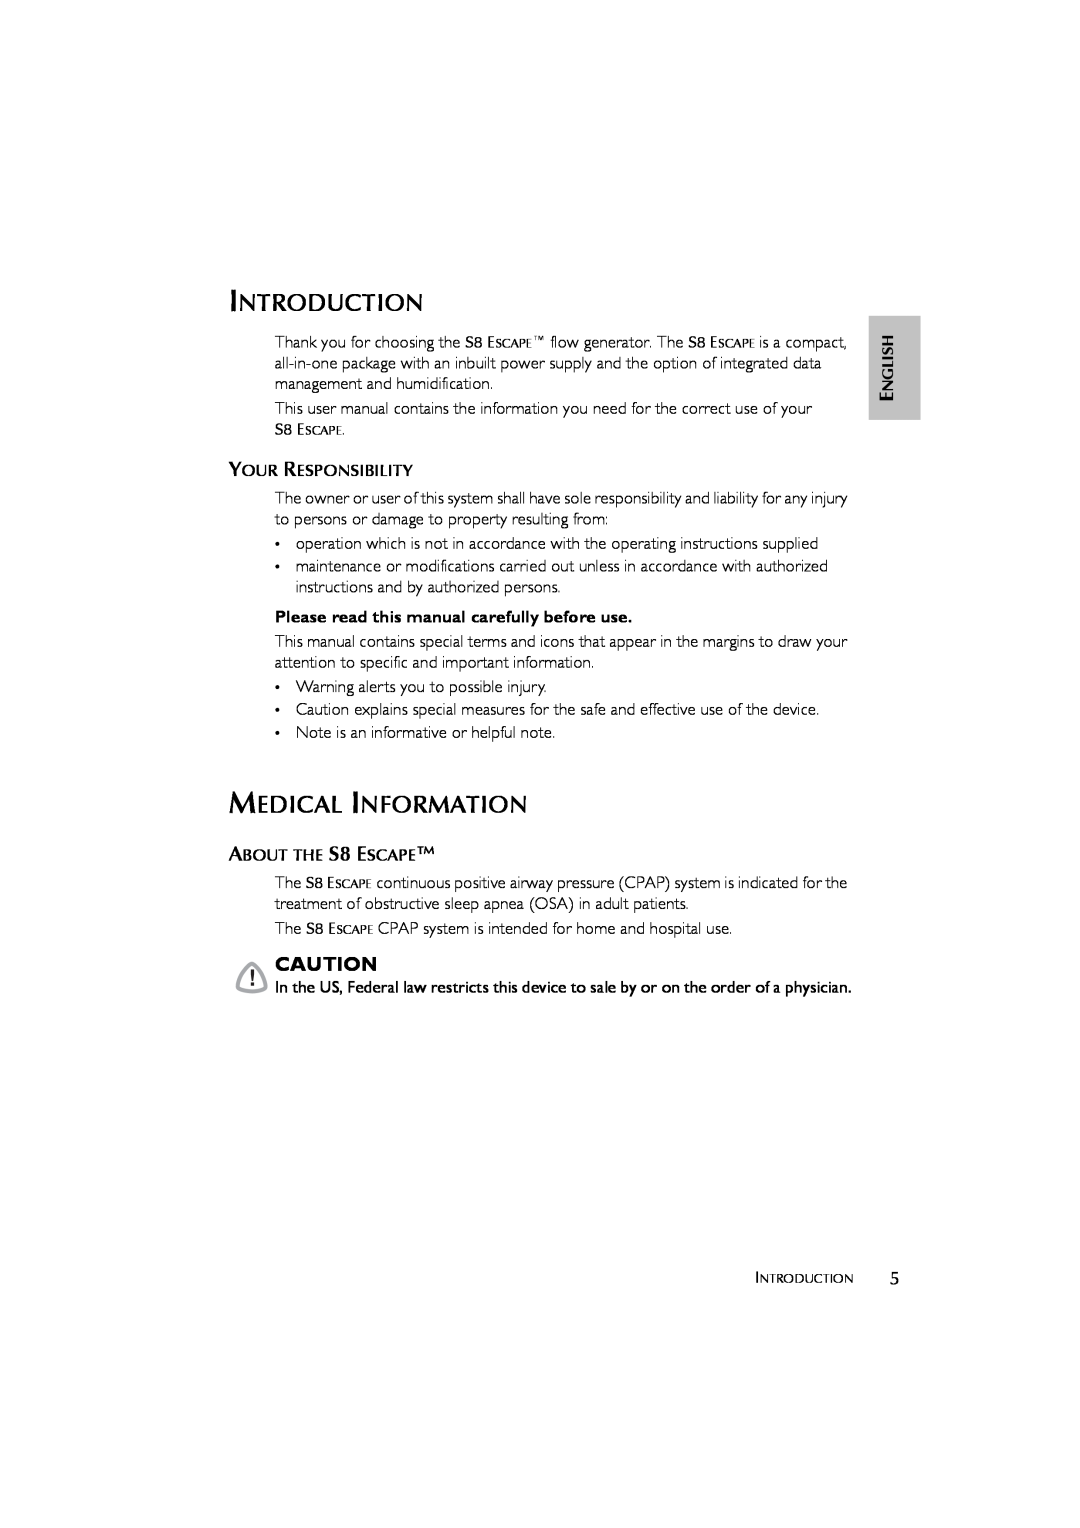 ResMed S8 ESCAPE SYSTEM, s8 user manual Introduction, Medical Information, Please read this manual carefully before use 